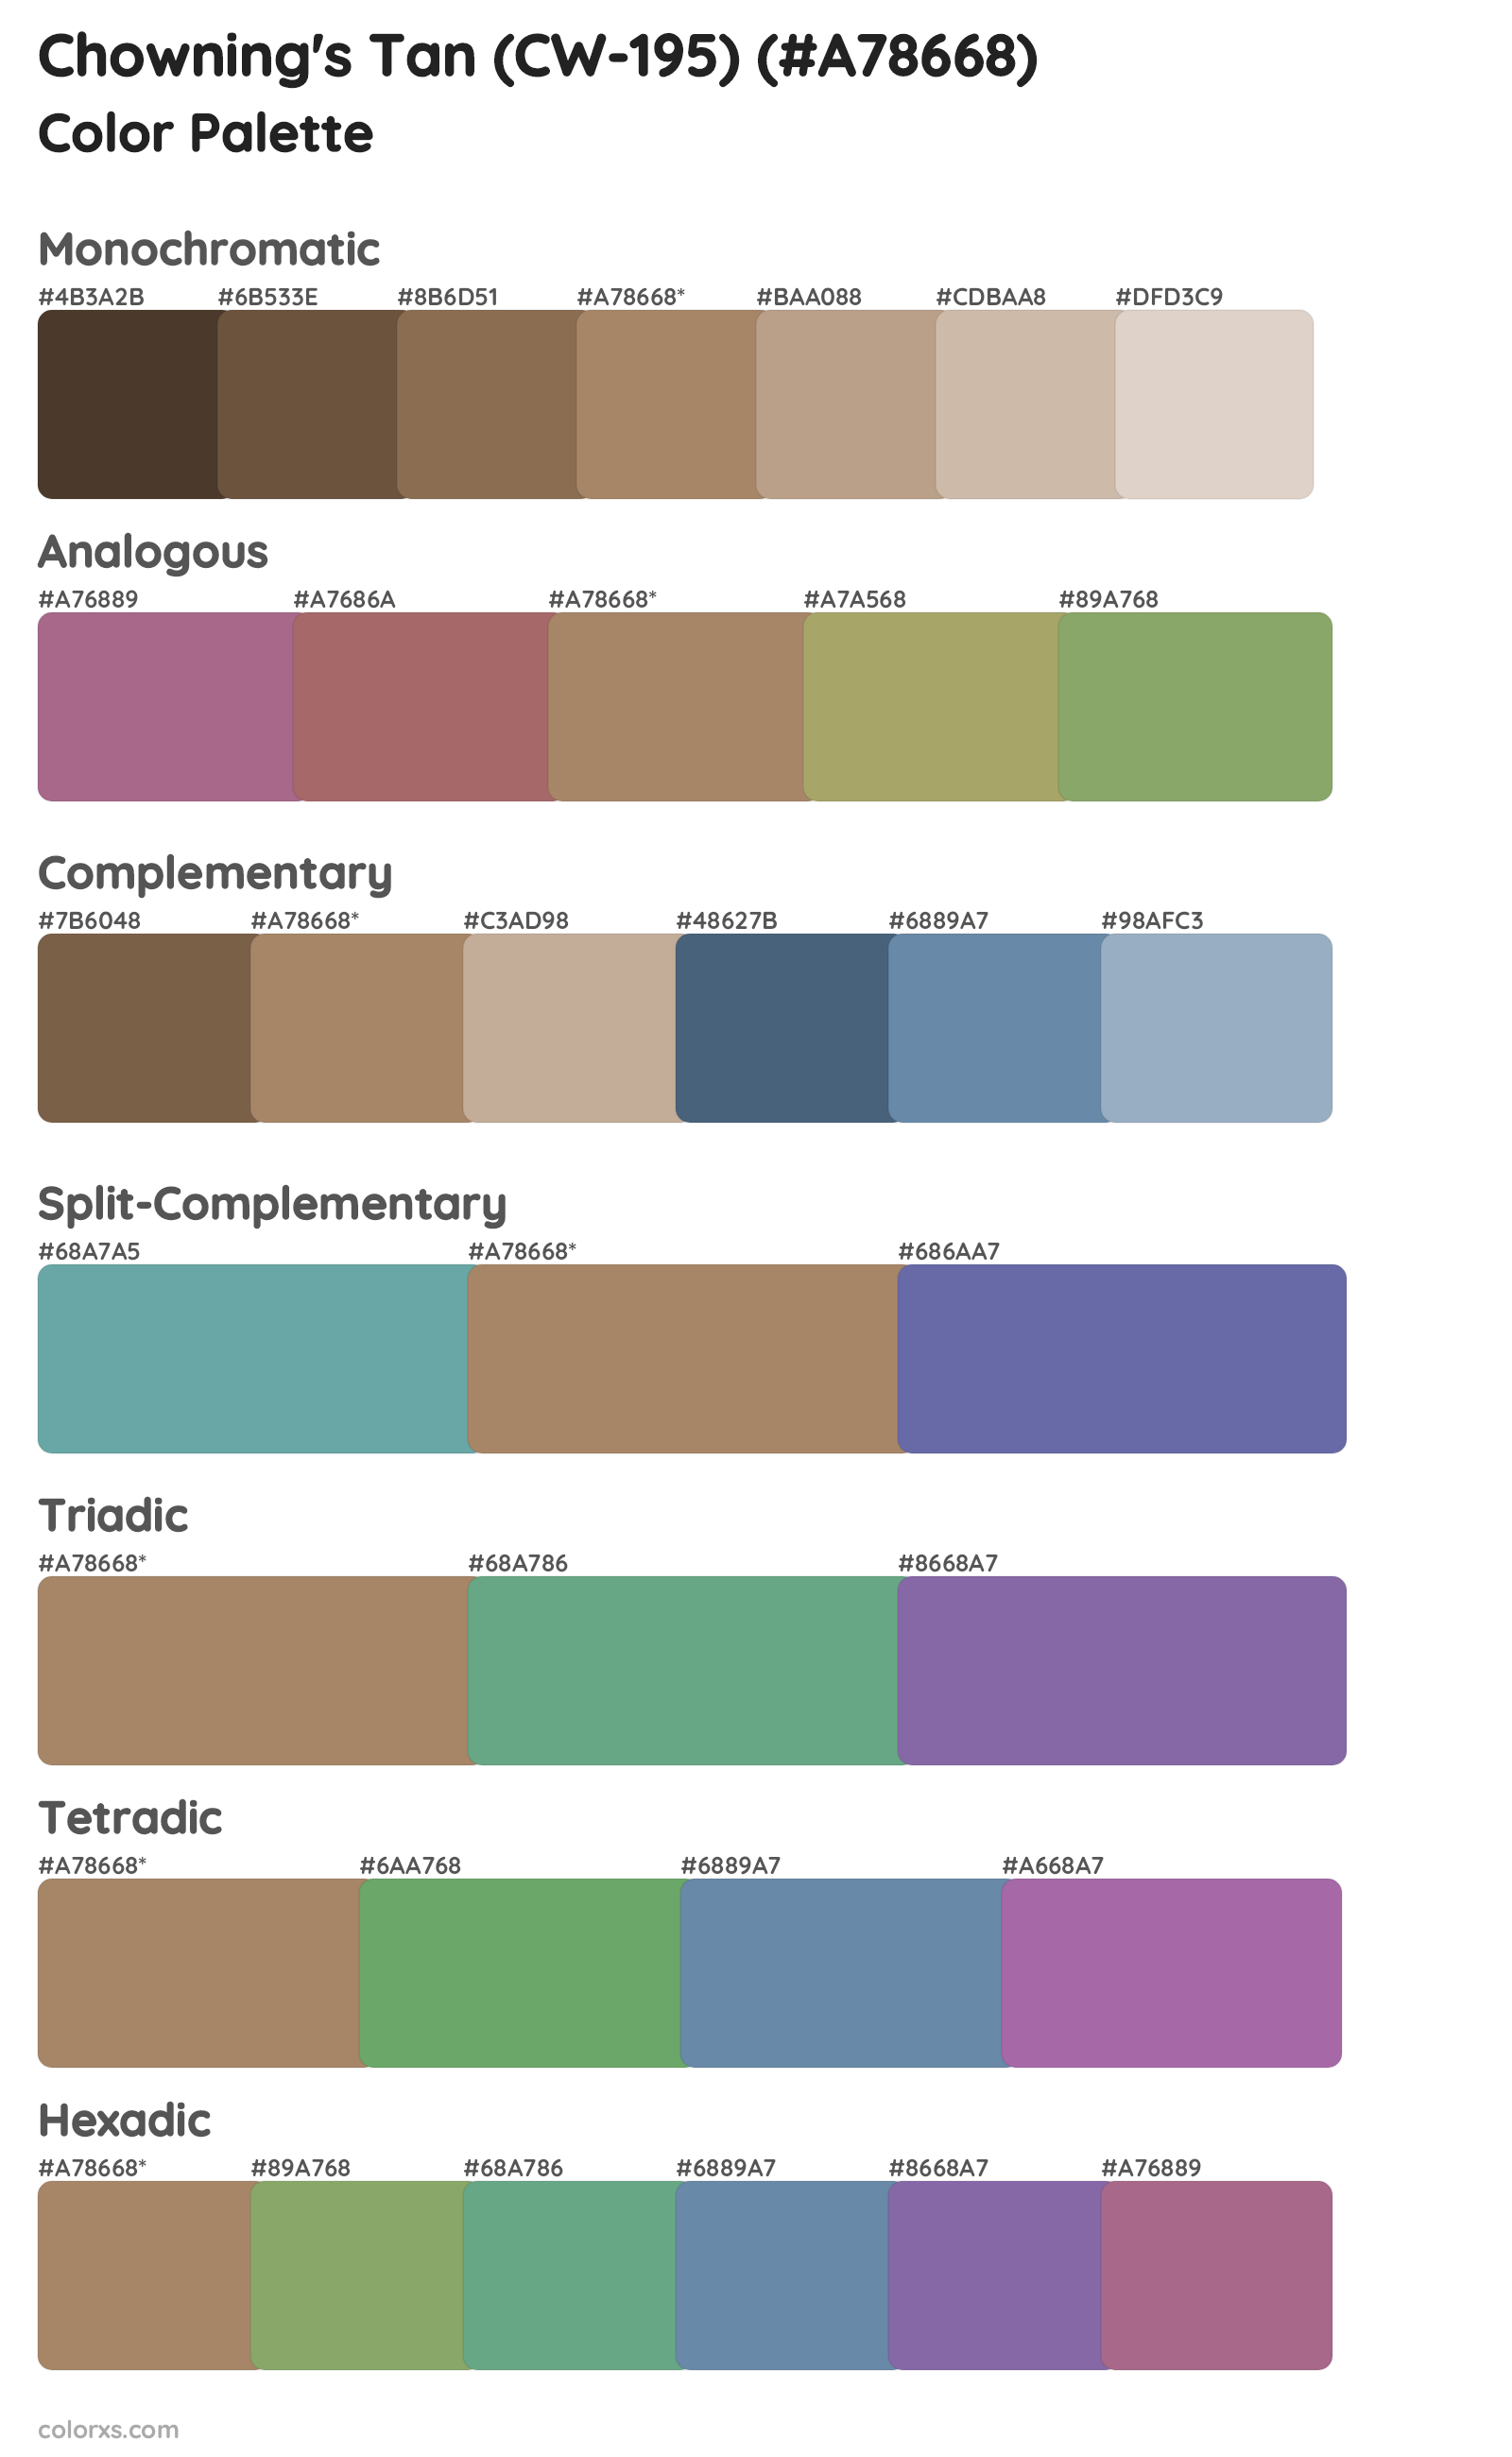 Chowning's Tan (CW-195) Color Scheme Palettes